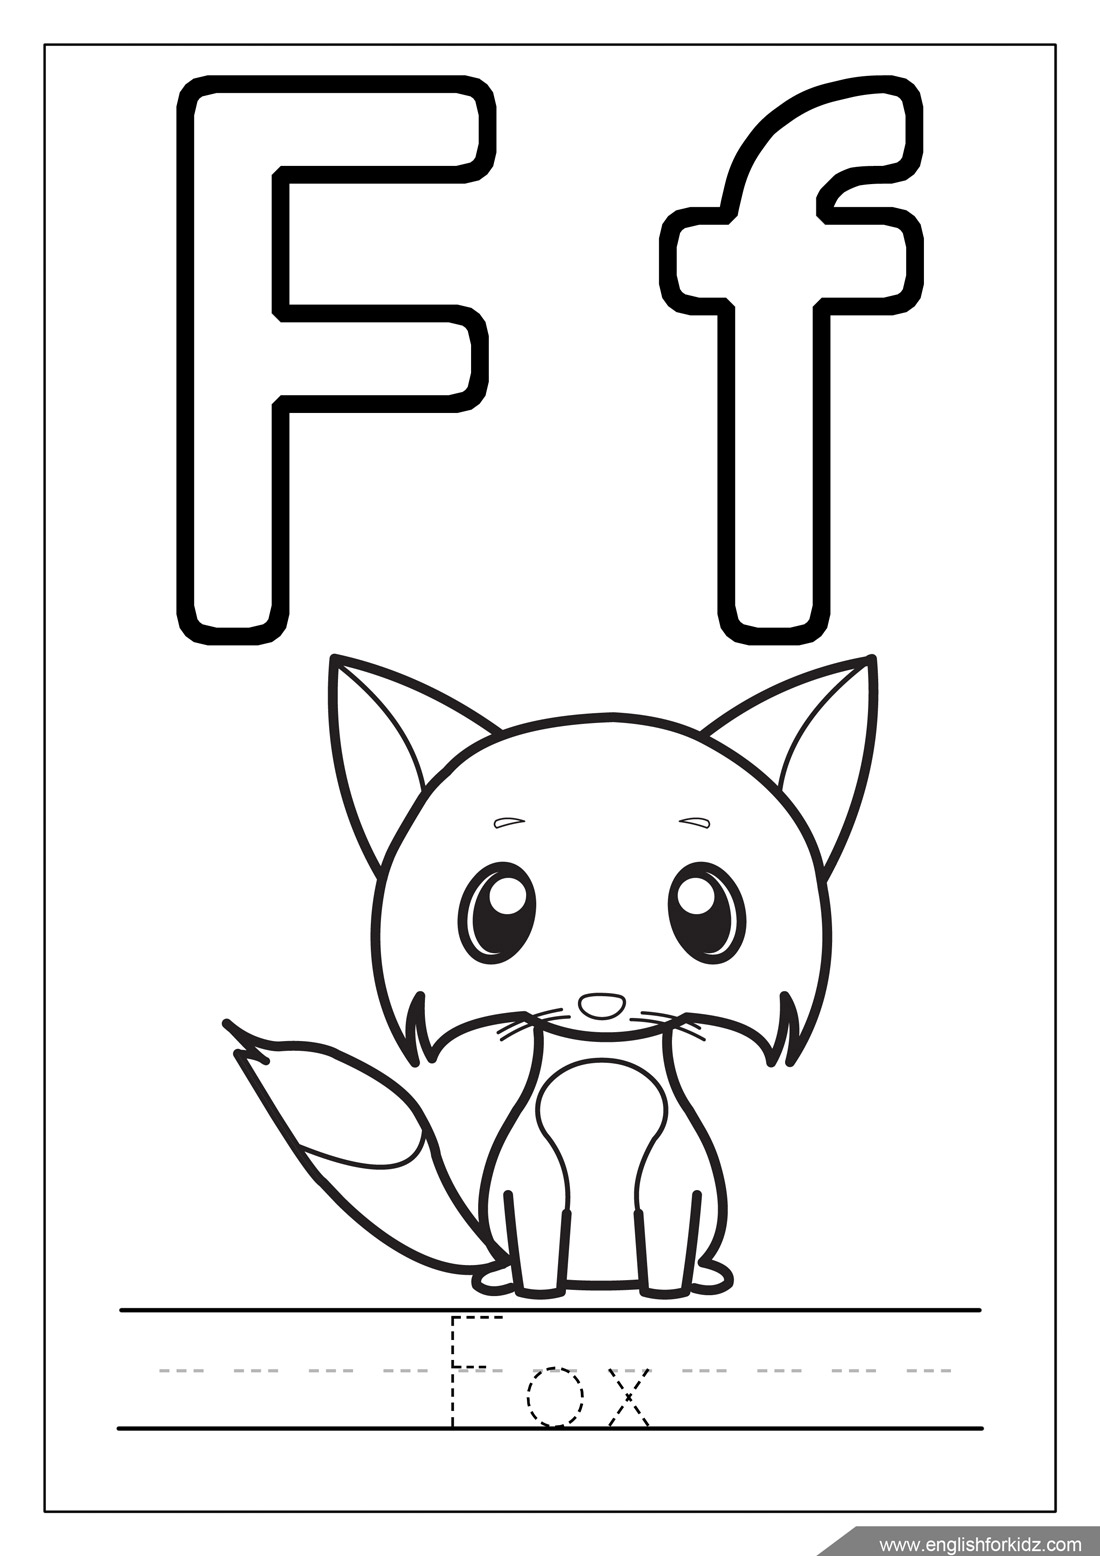 English for kids step by step letter f worksheets flash cards coloring pages